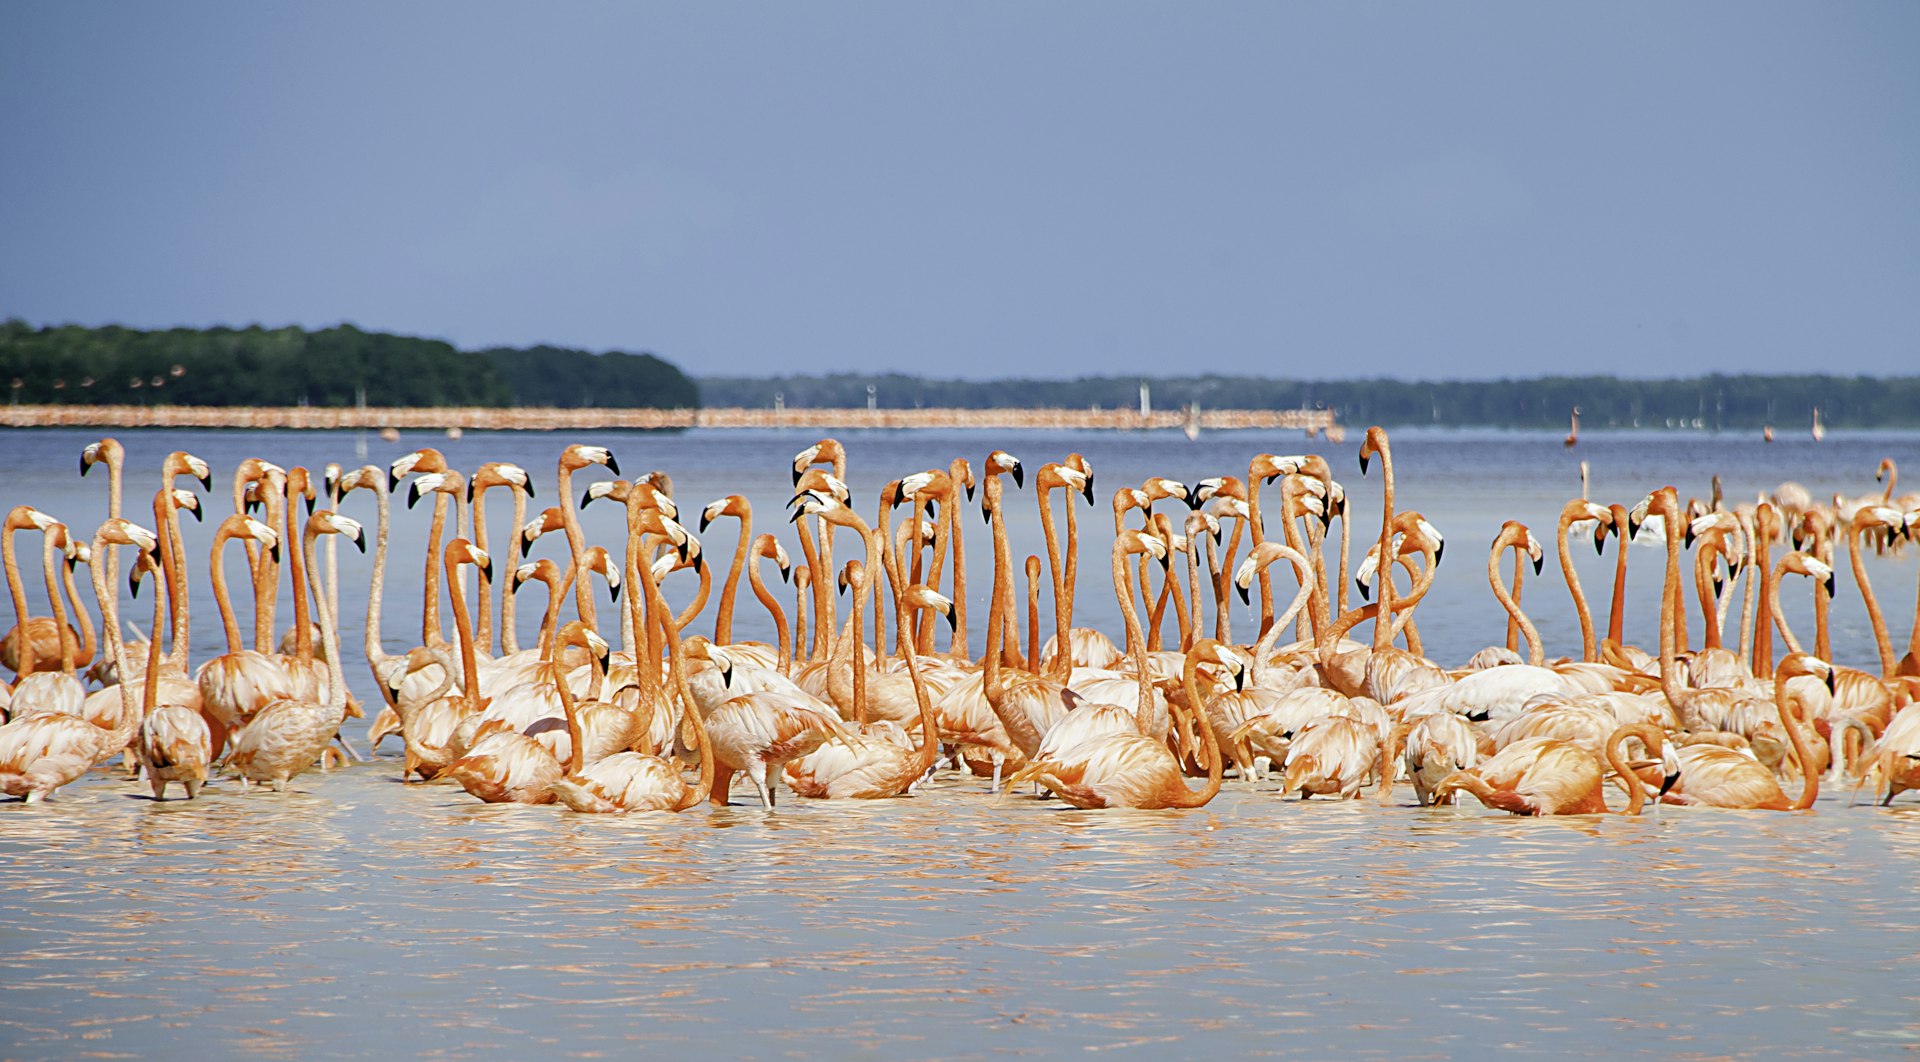 Large colony of flamingoes in the mangrove swamps of the Celestun Biosphere Reserve, Yucatan peninsula.